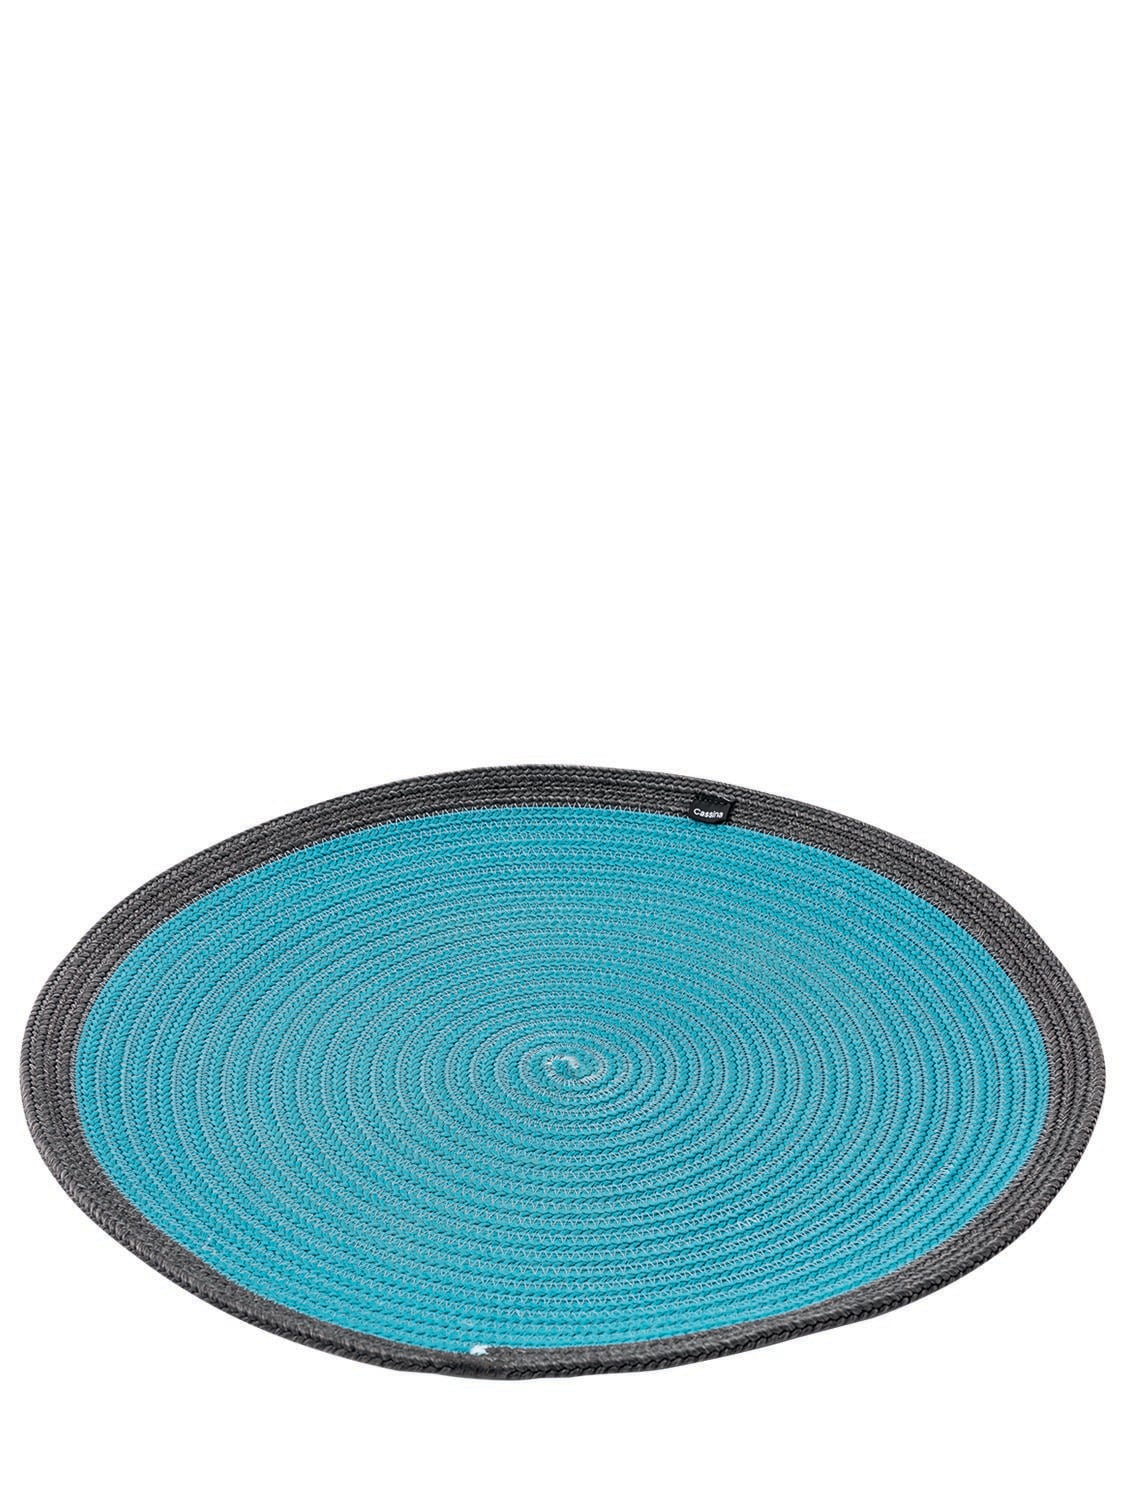 Cassina Mboro Placemat In Blue And Light Blue